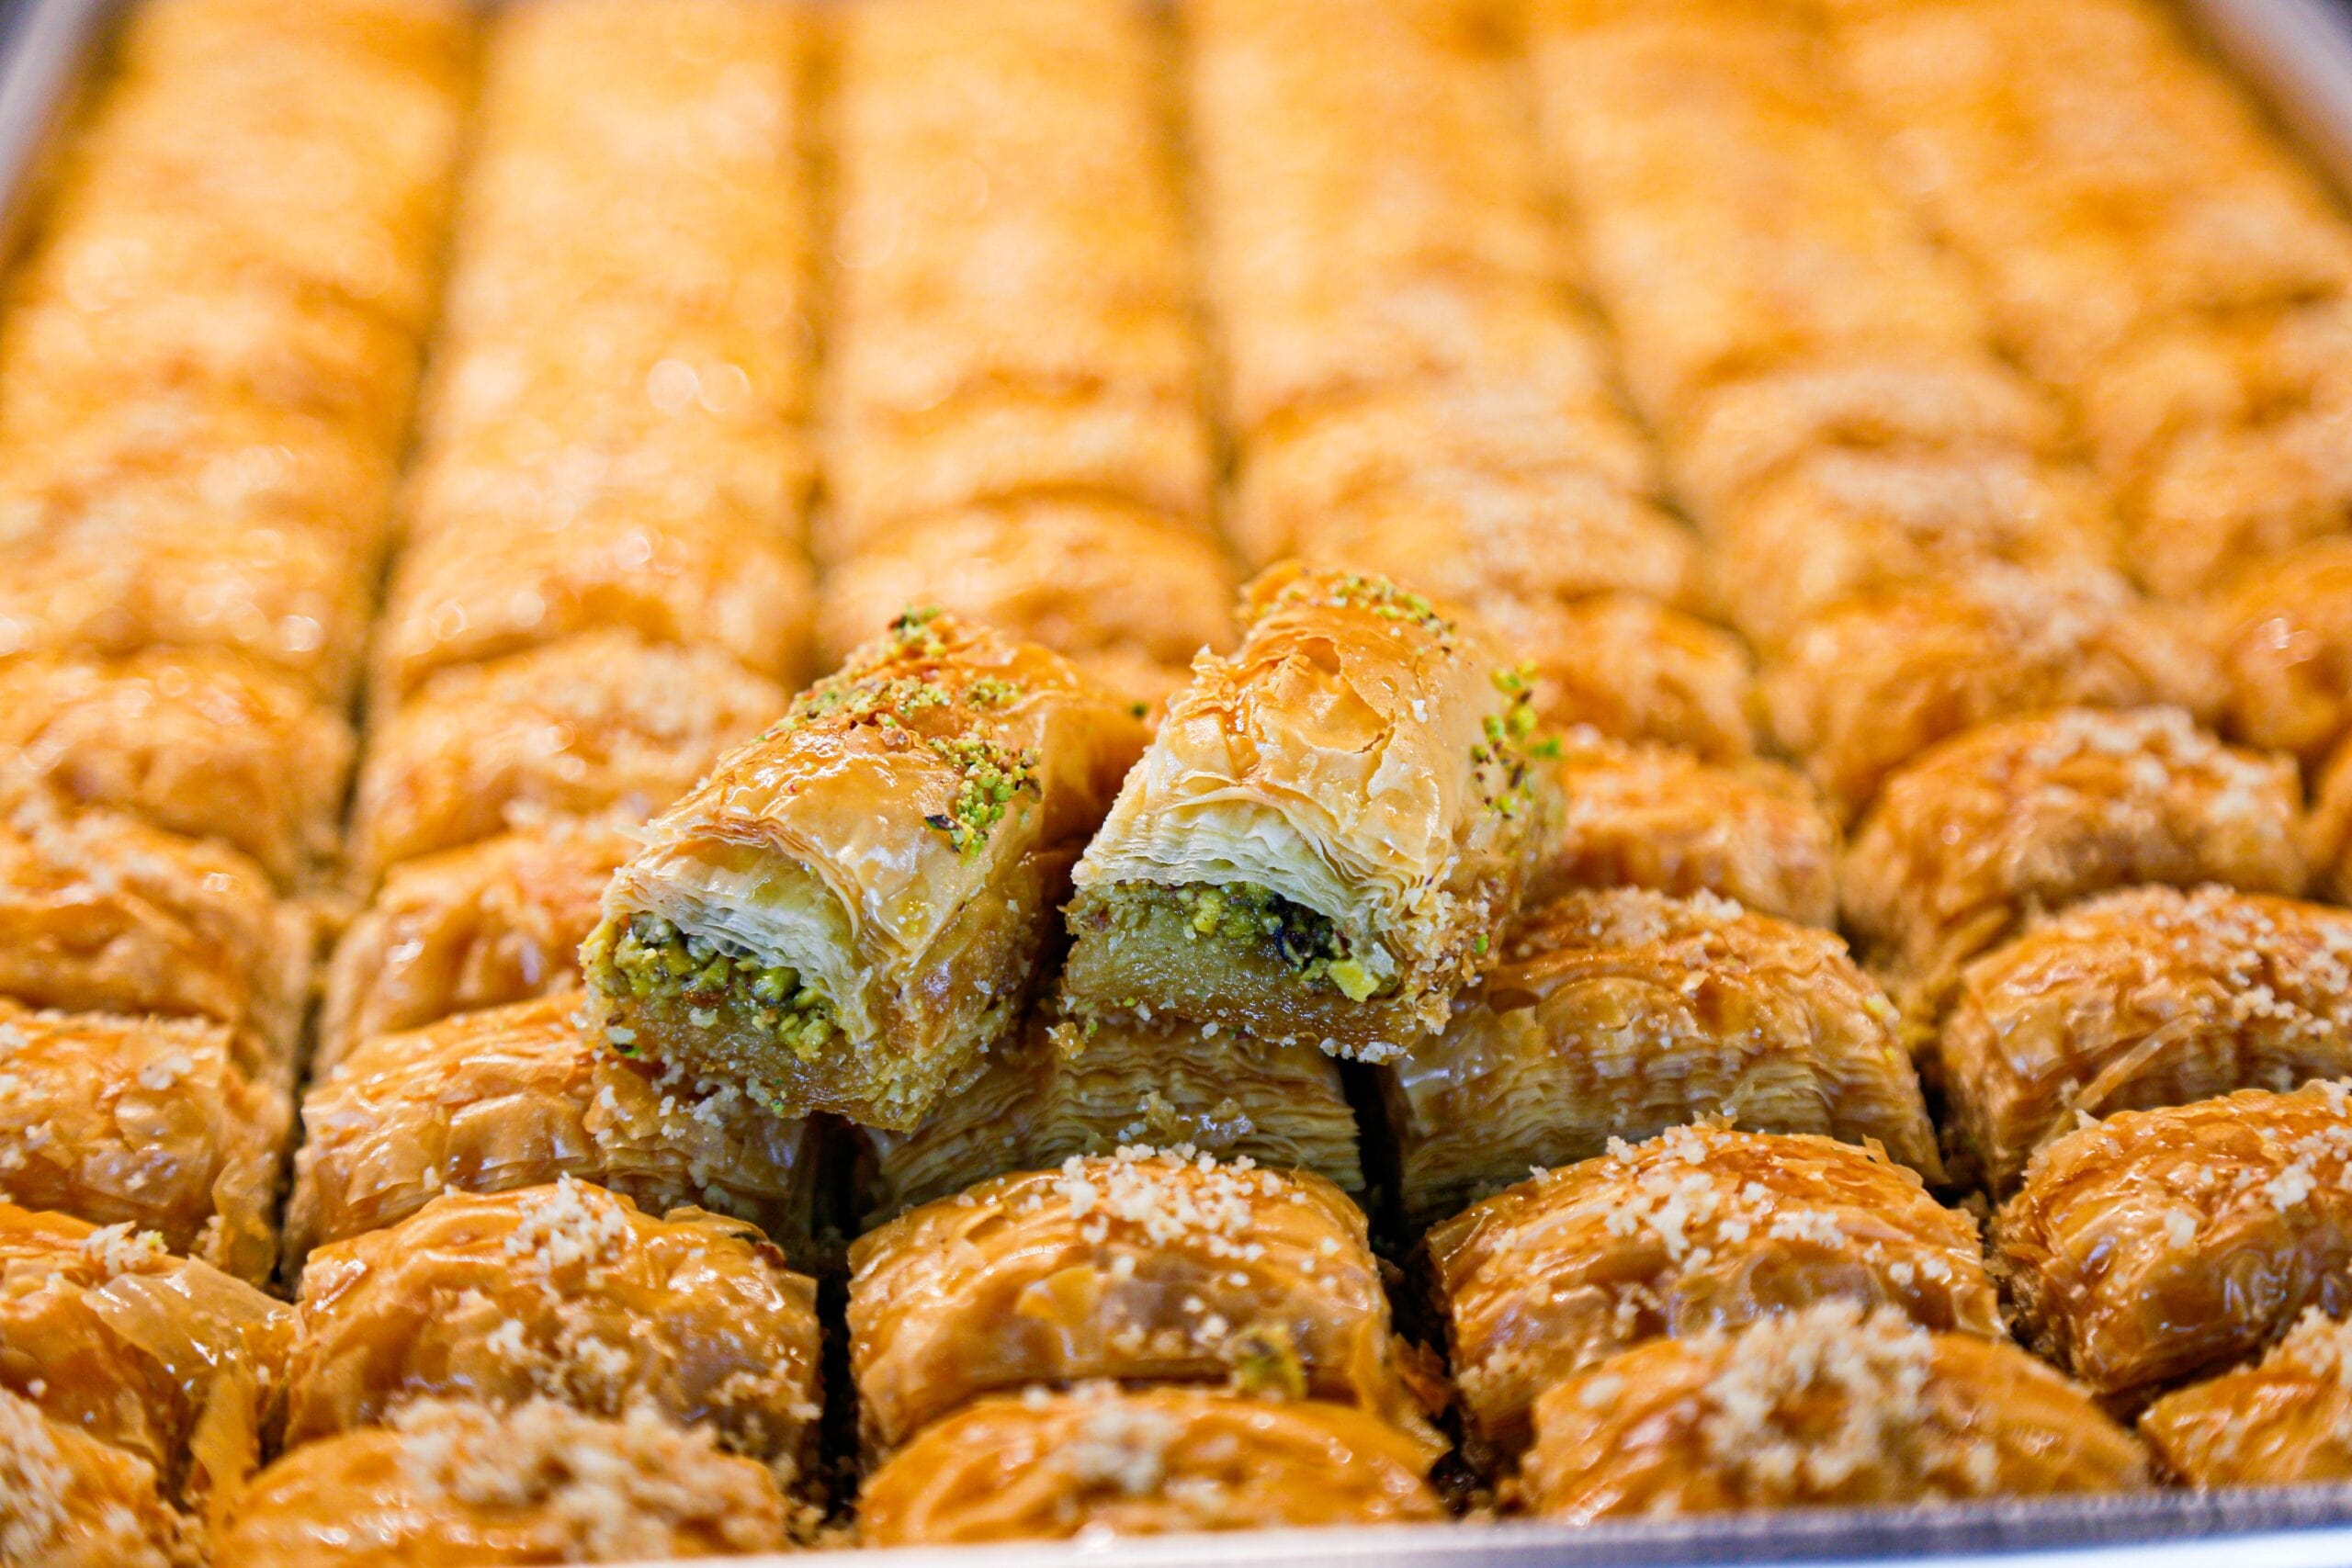 This is one of the most well-known Middle Eastern desserts. Can you guess what it is?